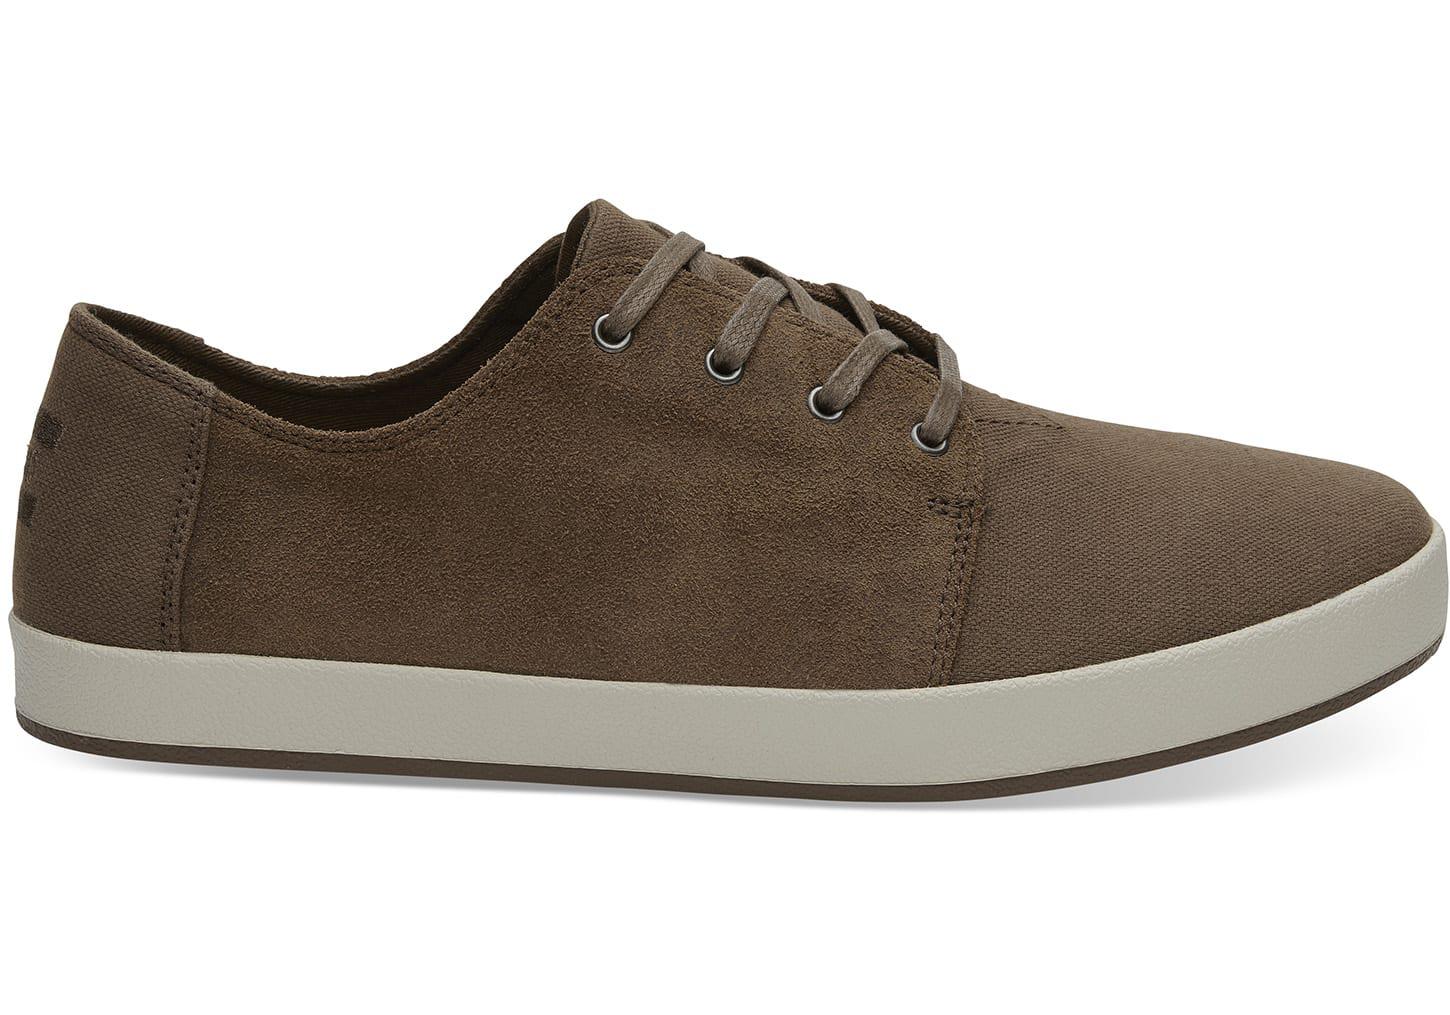 bark oiled suede cotton twill men's payton sneakers